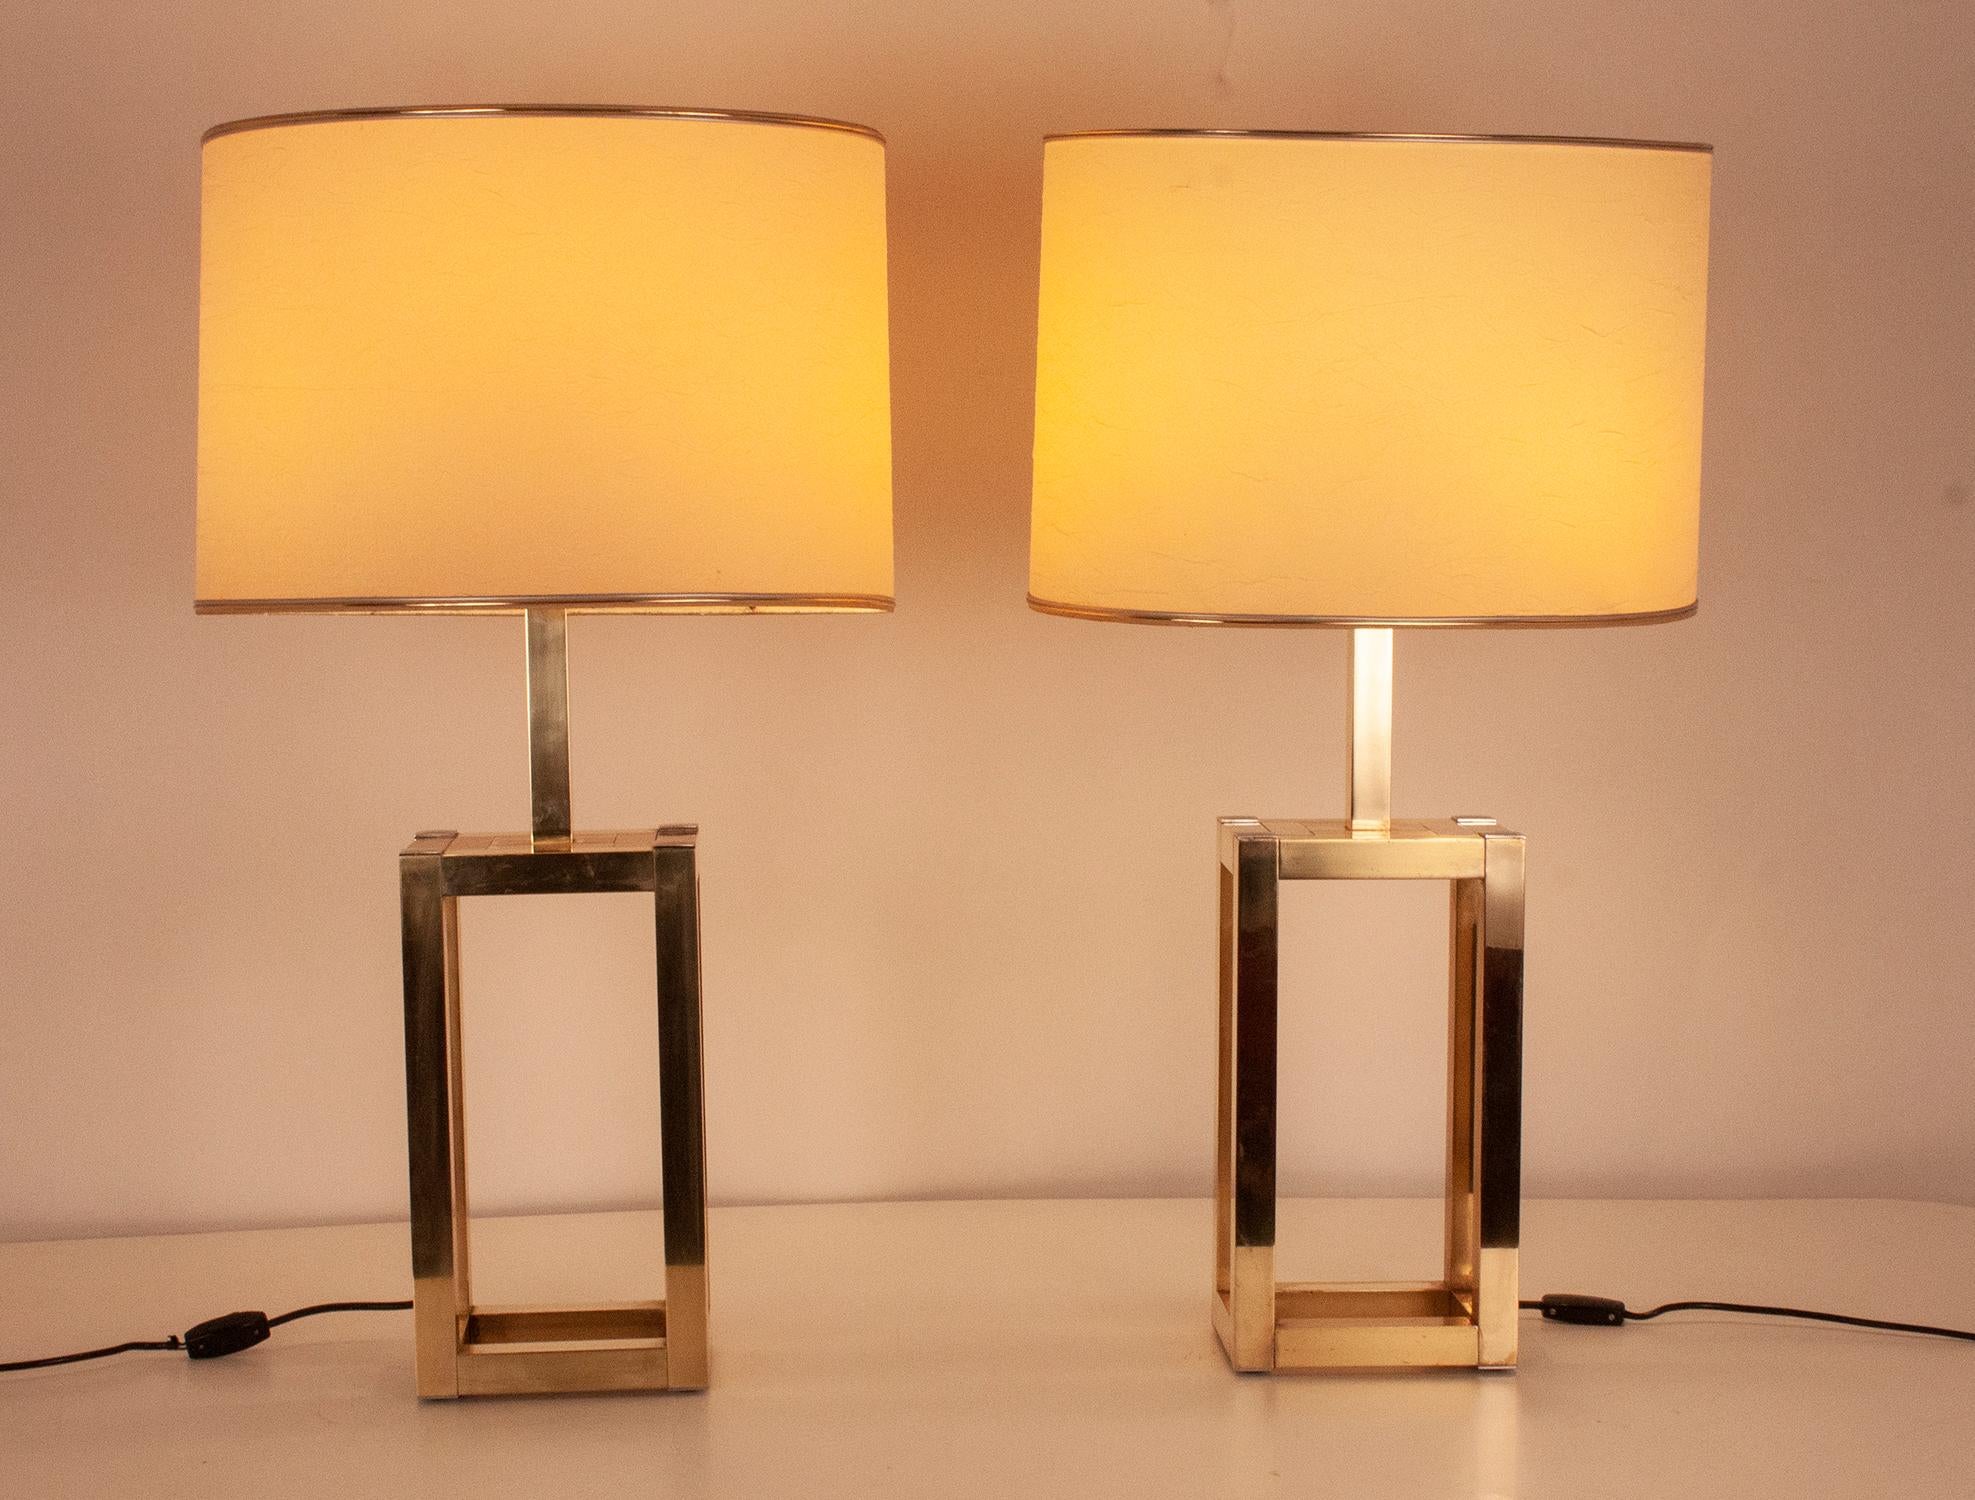 Large pair of brass lamps attributed to Willy Rizzo. Original screens. Produced by Lumica
In very good condition. Three light bulbs.